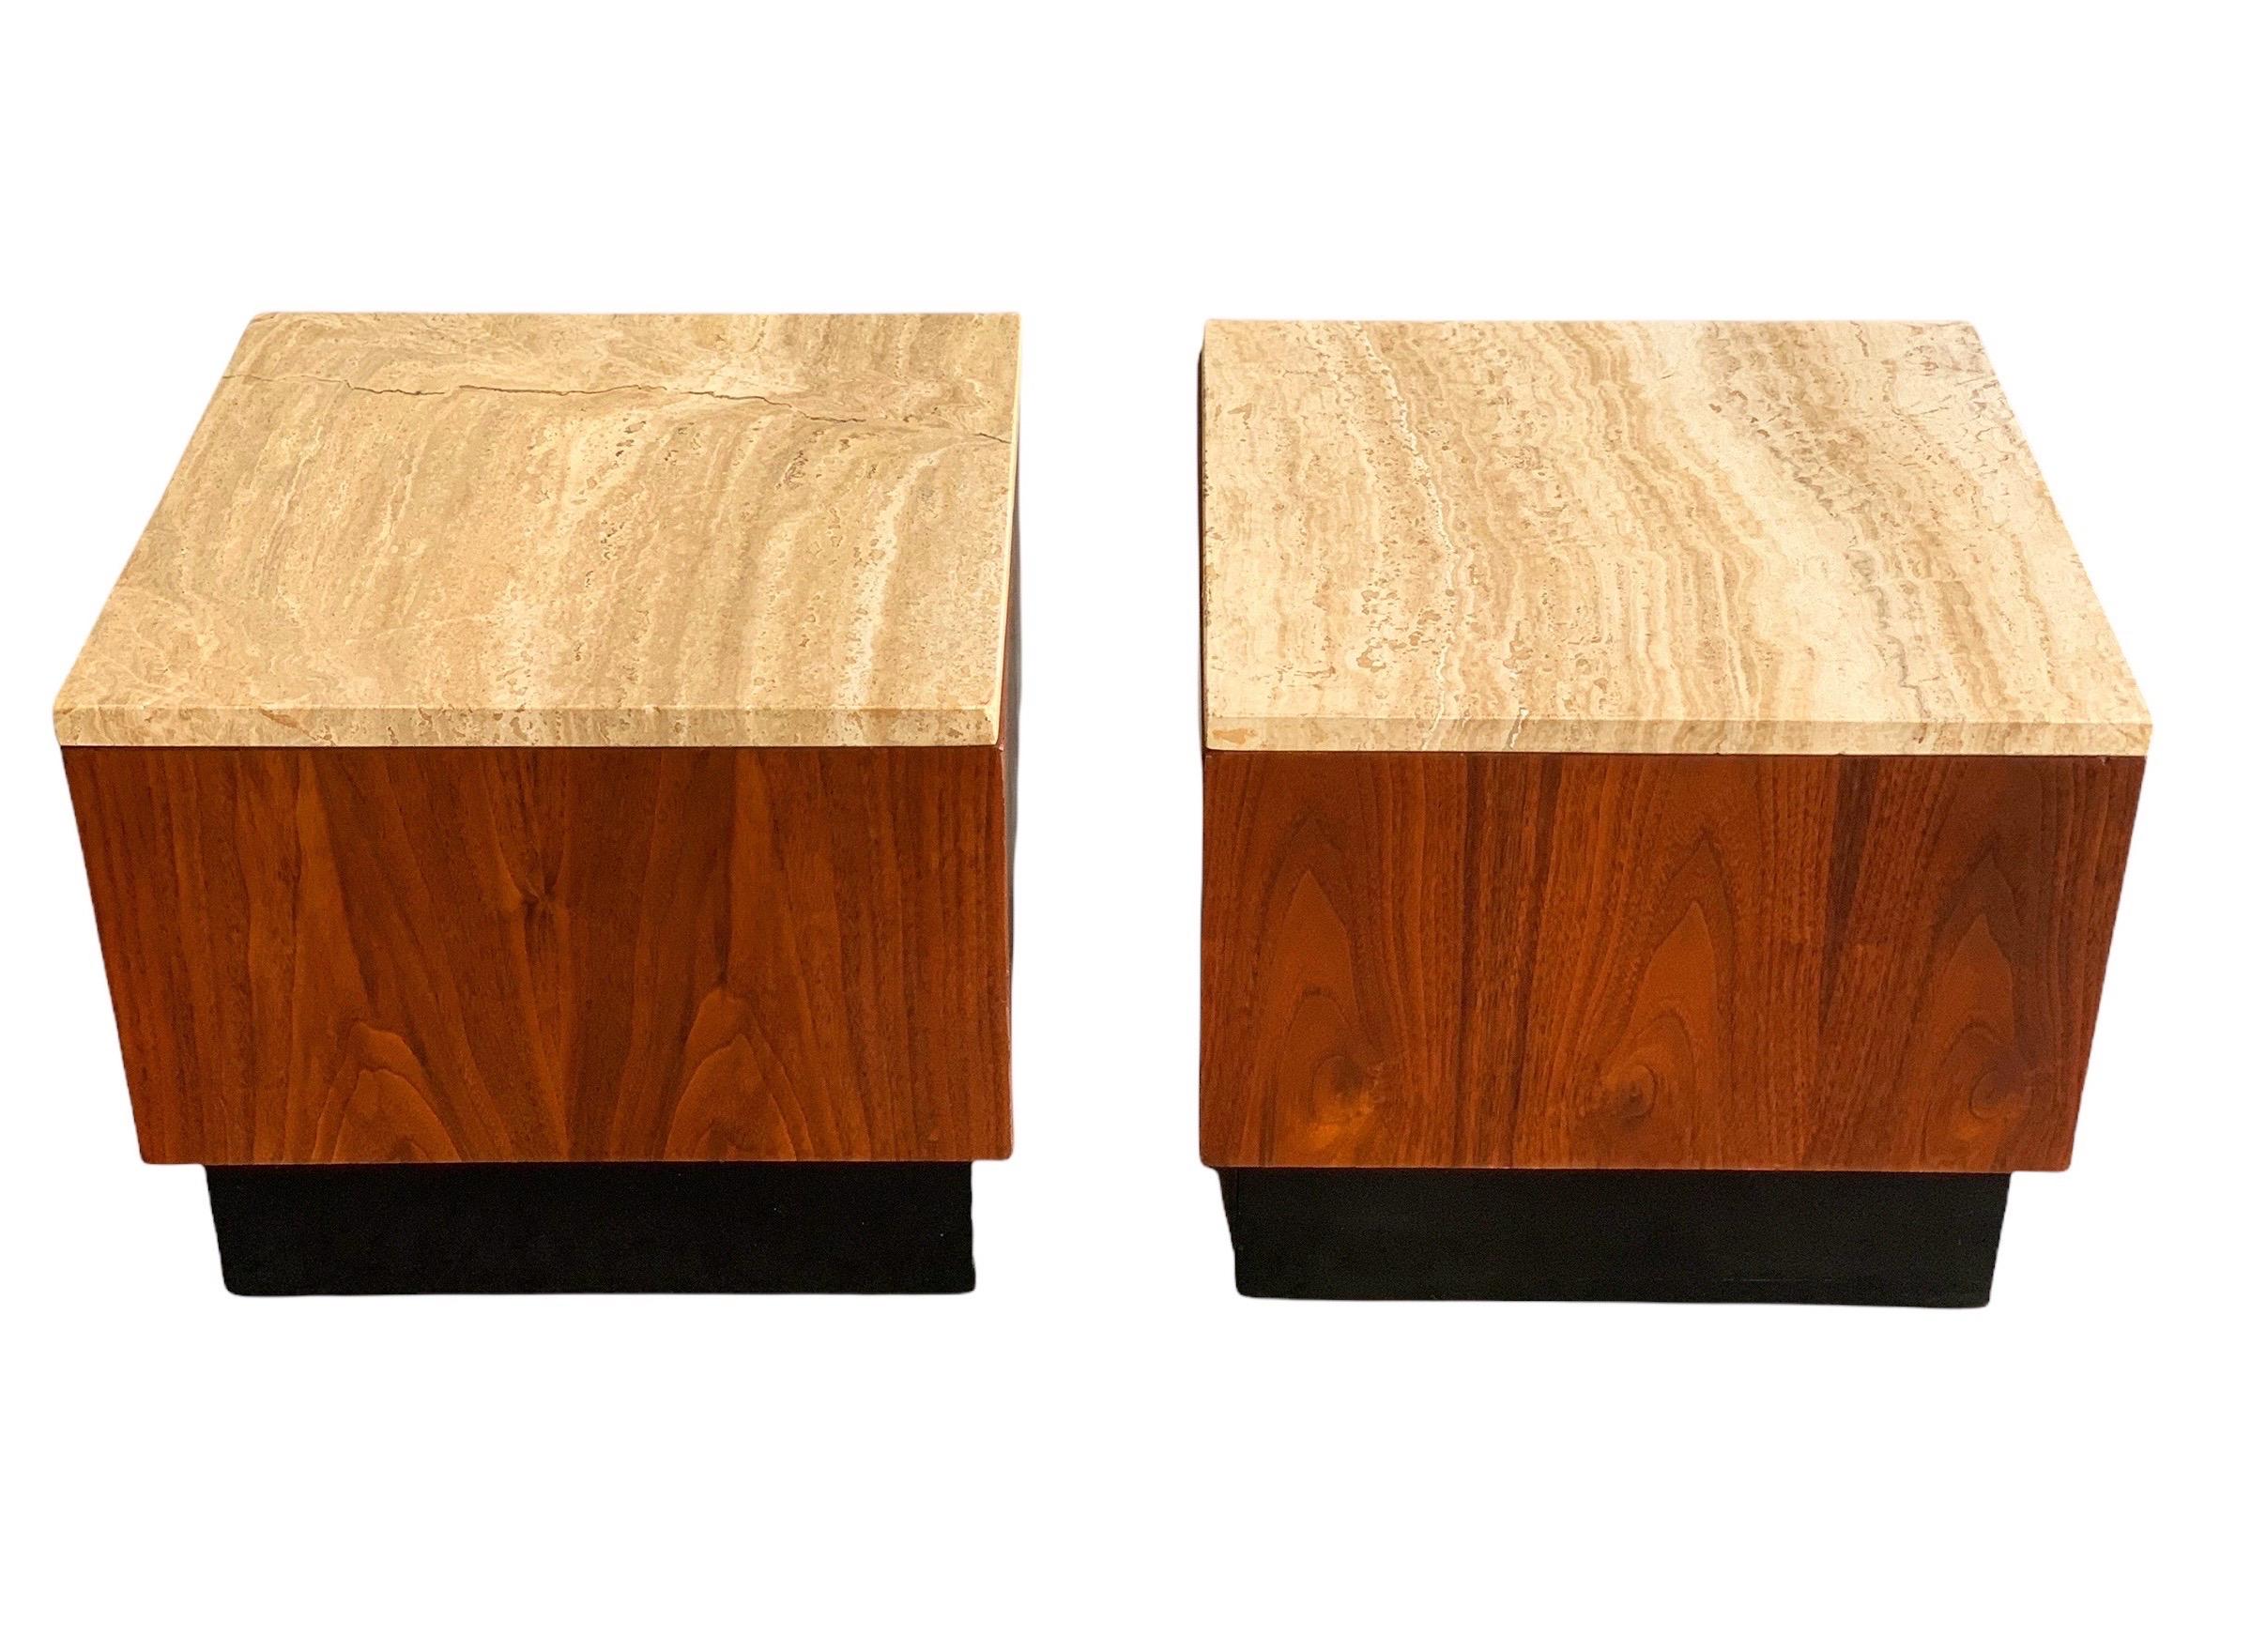 Pair of MidCentury Adrian Pearsall Cube Pedestal Tables in Walnut and Travertine 1